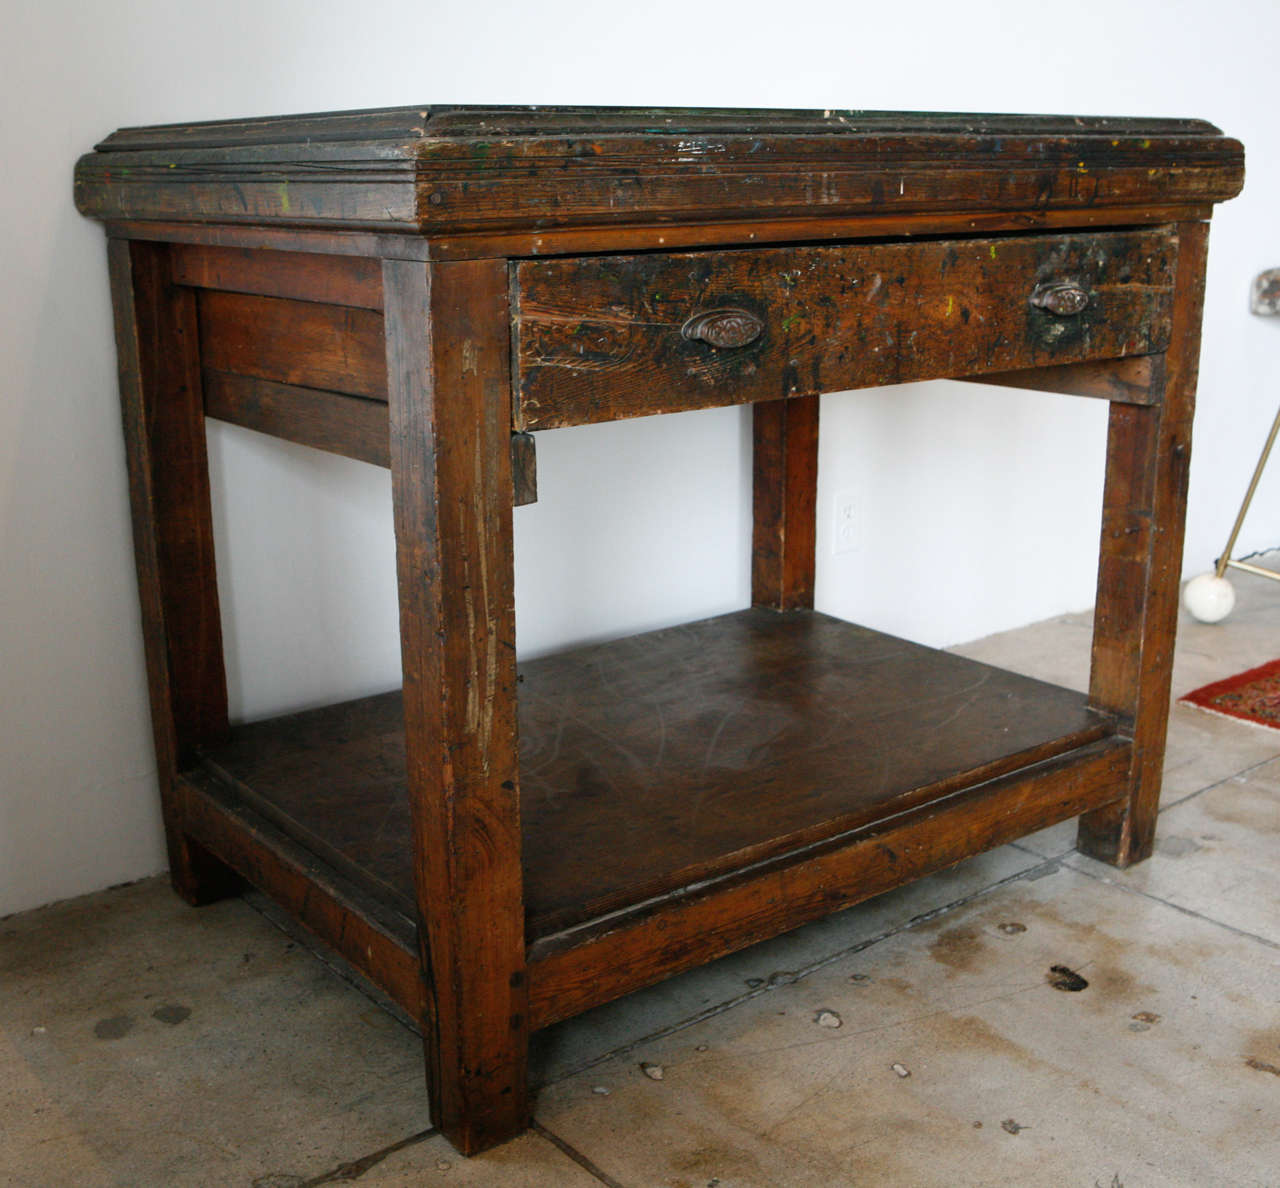 A formidable printers table from France with a bluestone slab worktop.